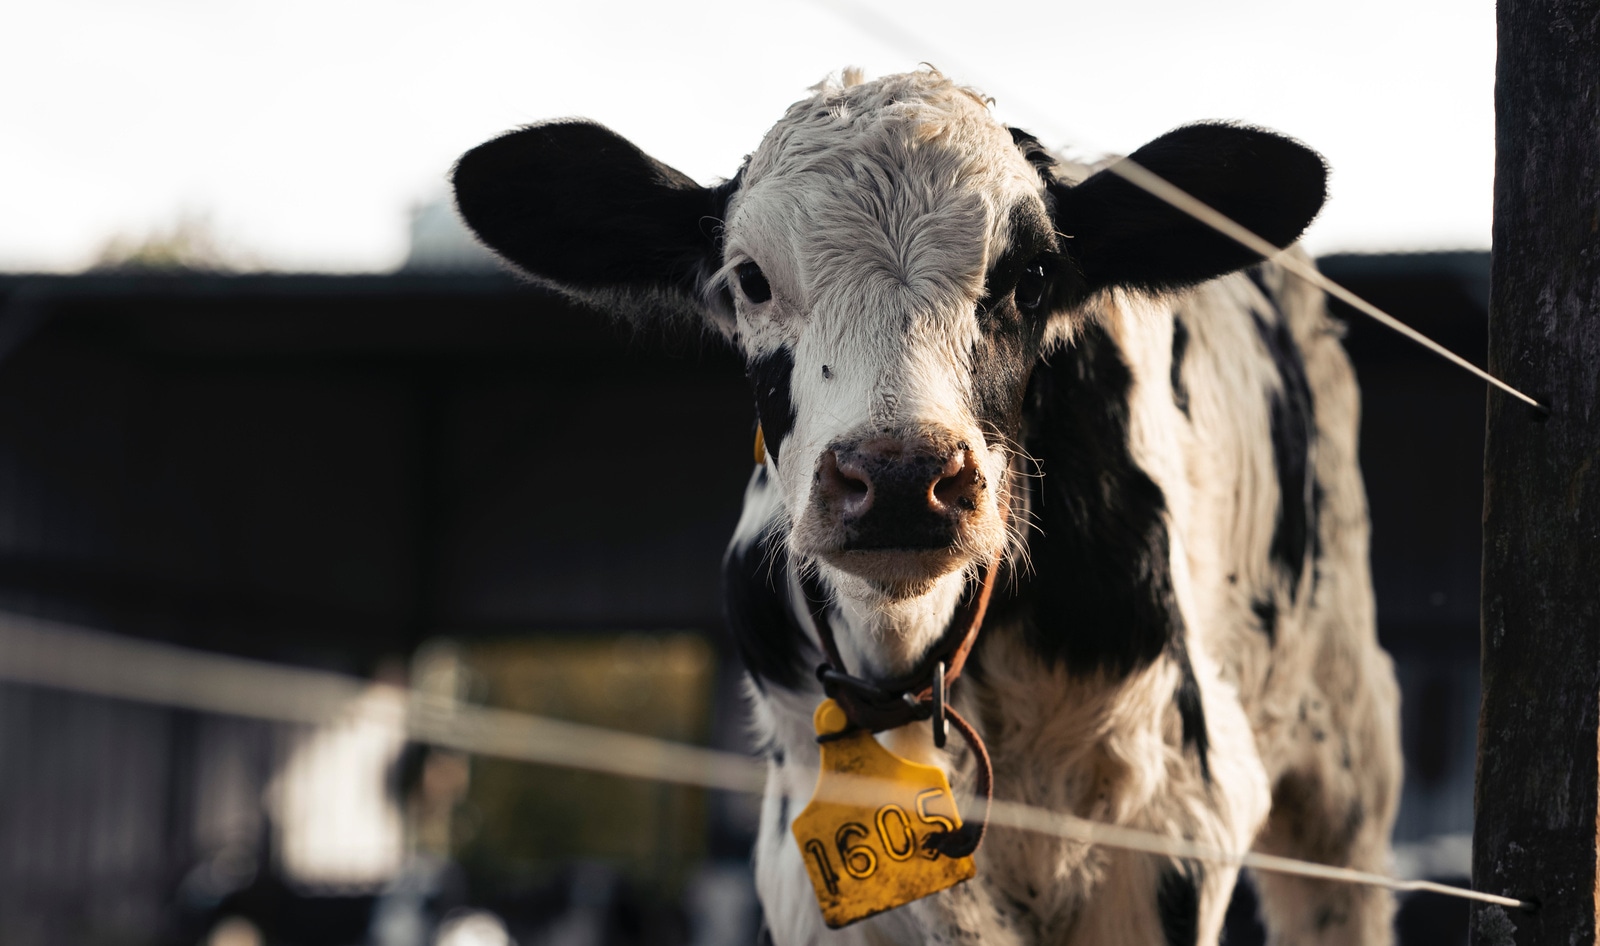 Legal Victory: Court Directs DA to Prosecute Former Nestlé Dairy Supplier  for Animal Cruelty | VegNews